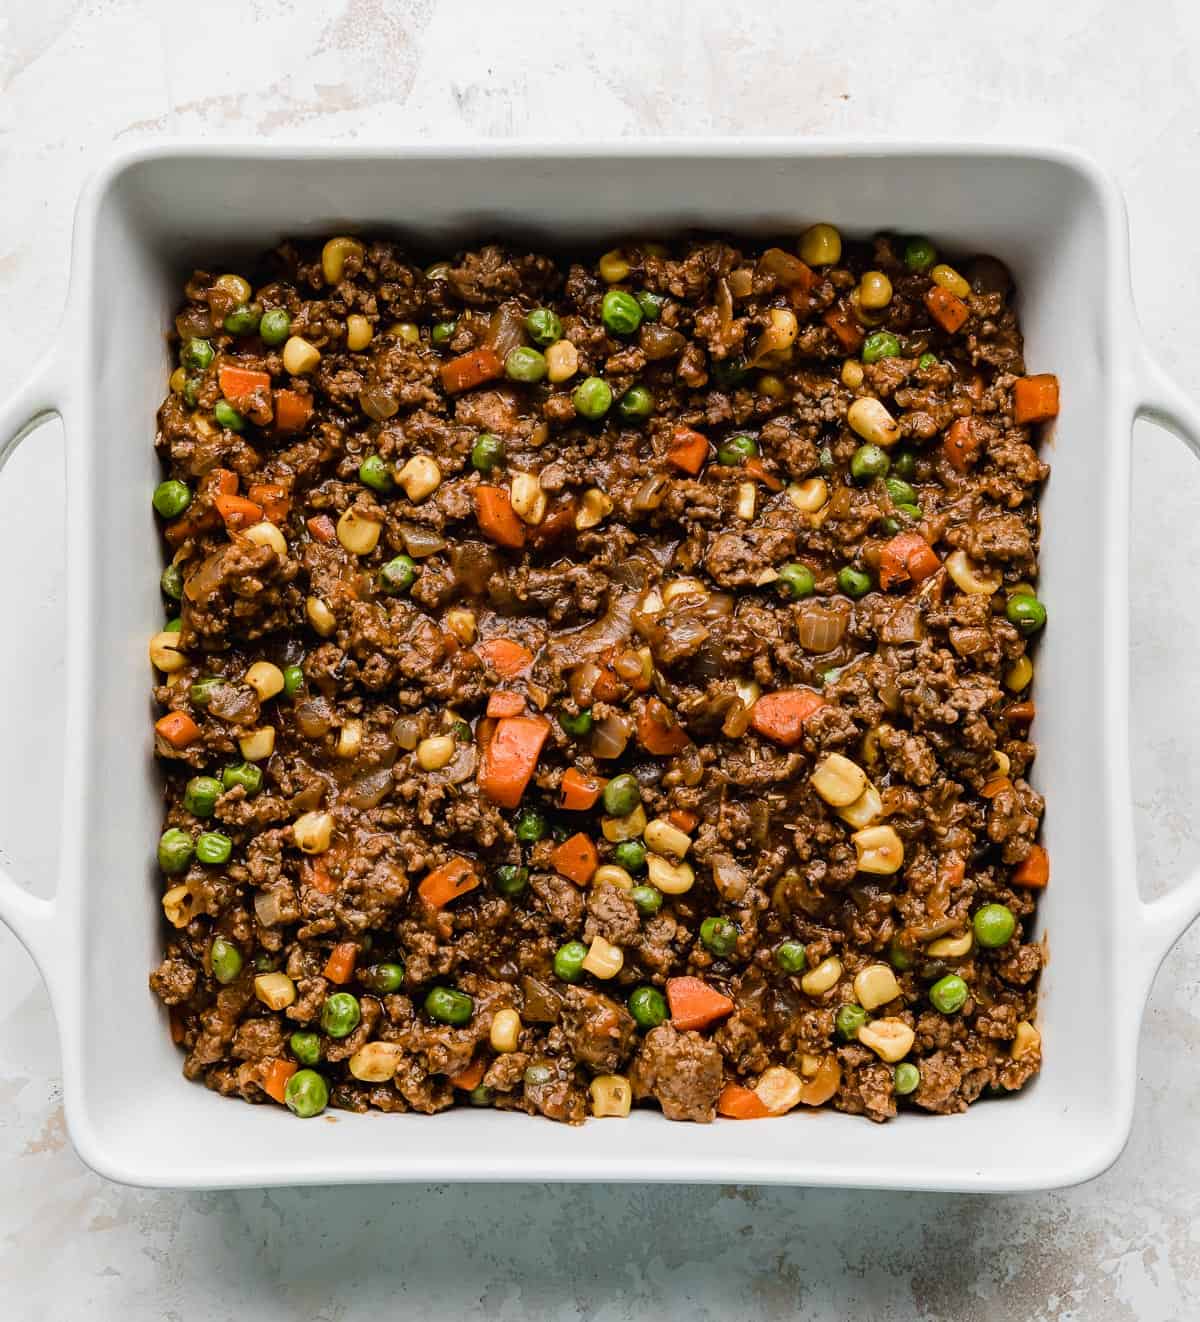 A white square baking dish filled with ground beef Easy Shepherd's Pie mixture.